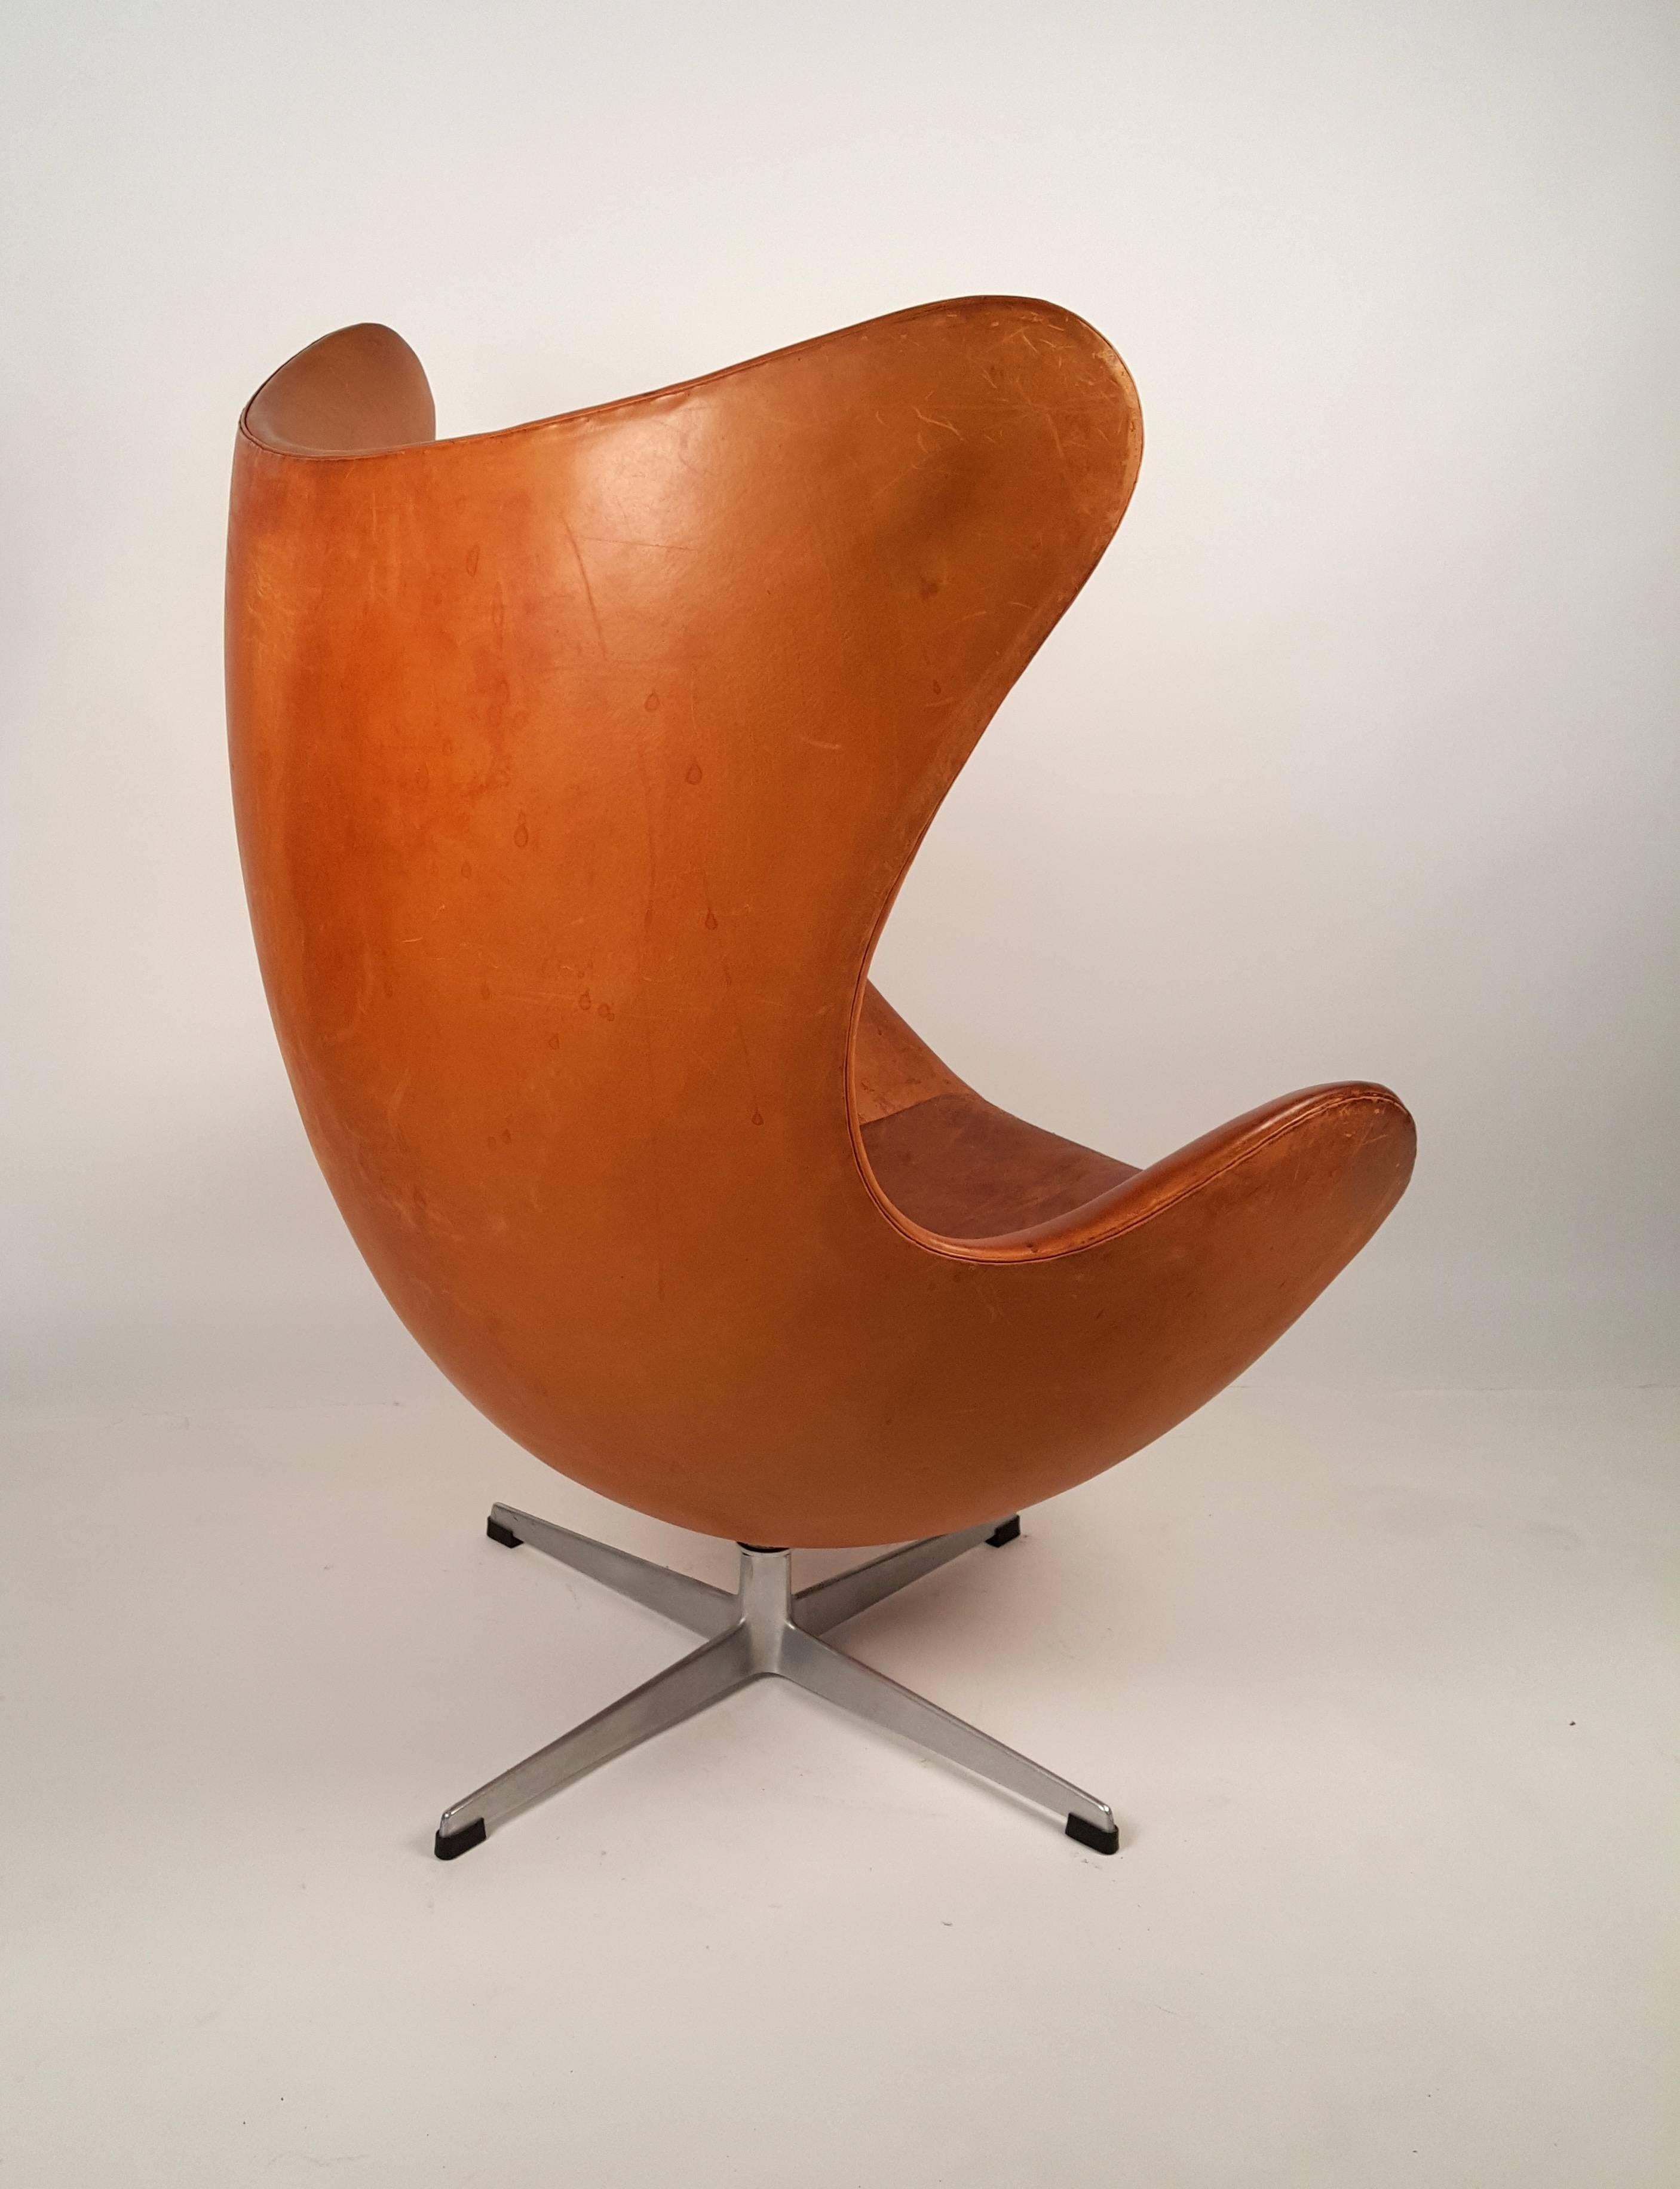 Early production Egg chair with matching ottoman in original cognac leather designed by Arne Jacobsen and produced by Fritz Hansen, Denmark. The beautiful distressed patina to the leather of this well loved chair was achieved by many years of